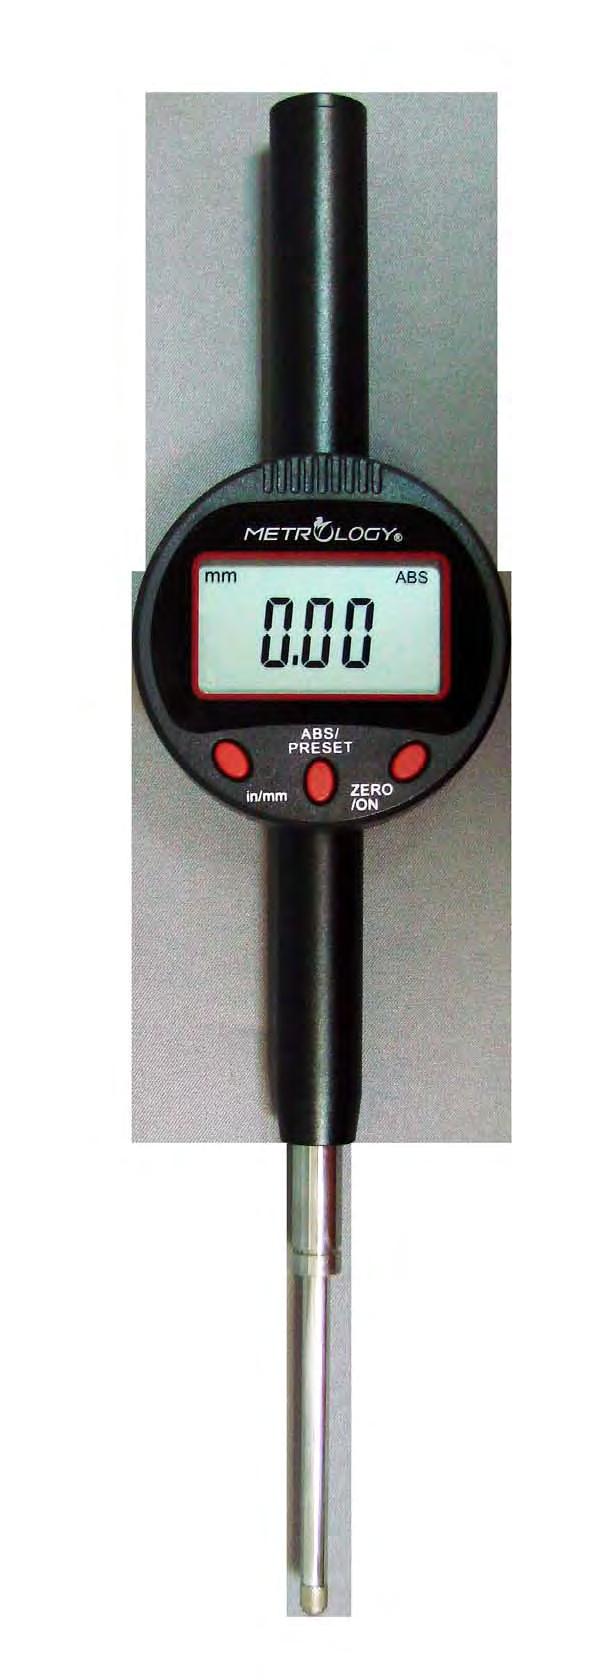 Digital Dial Gauge (Standard) Suitable for pairing up with measuring stands to measure depth, thickness, height, steps, and length.